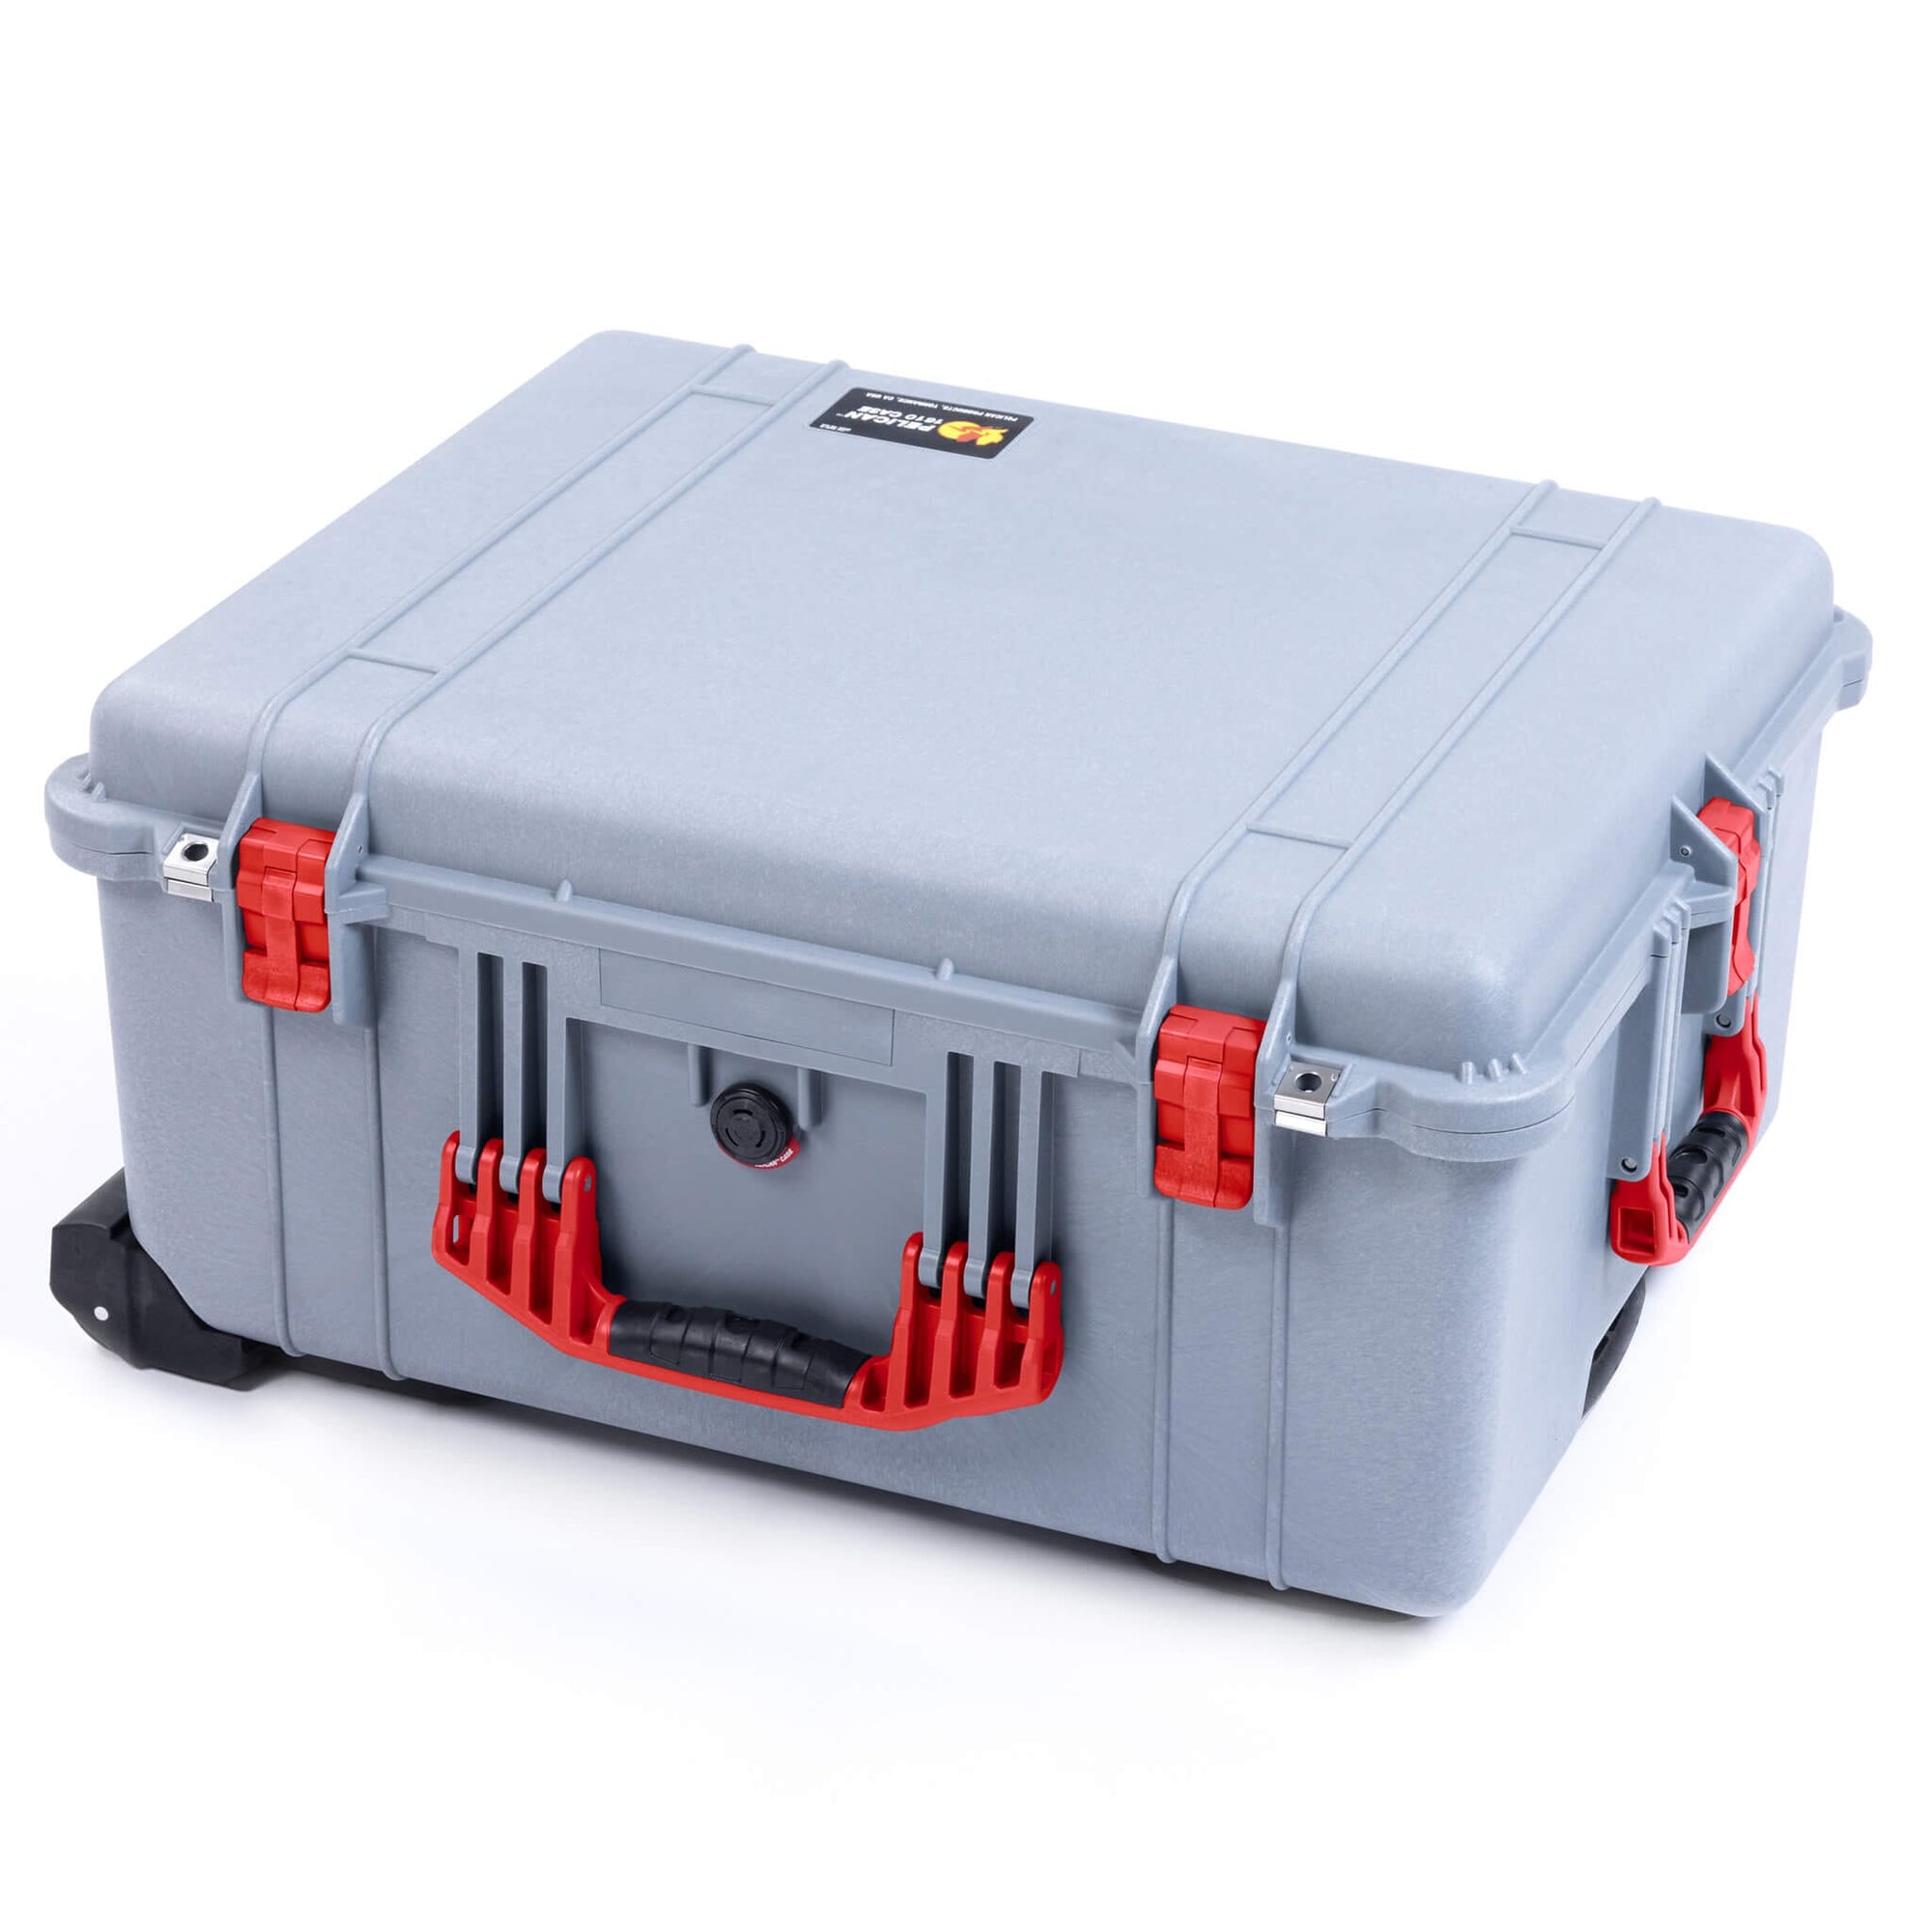 Pelican 1610 Case, Silver with Red Handles and Latches